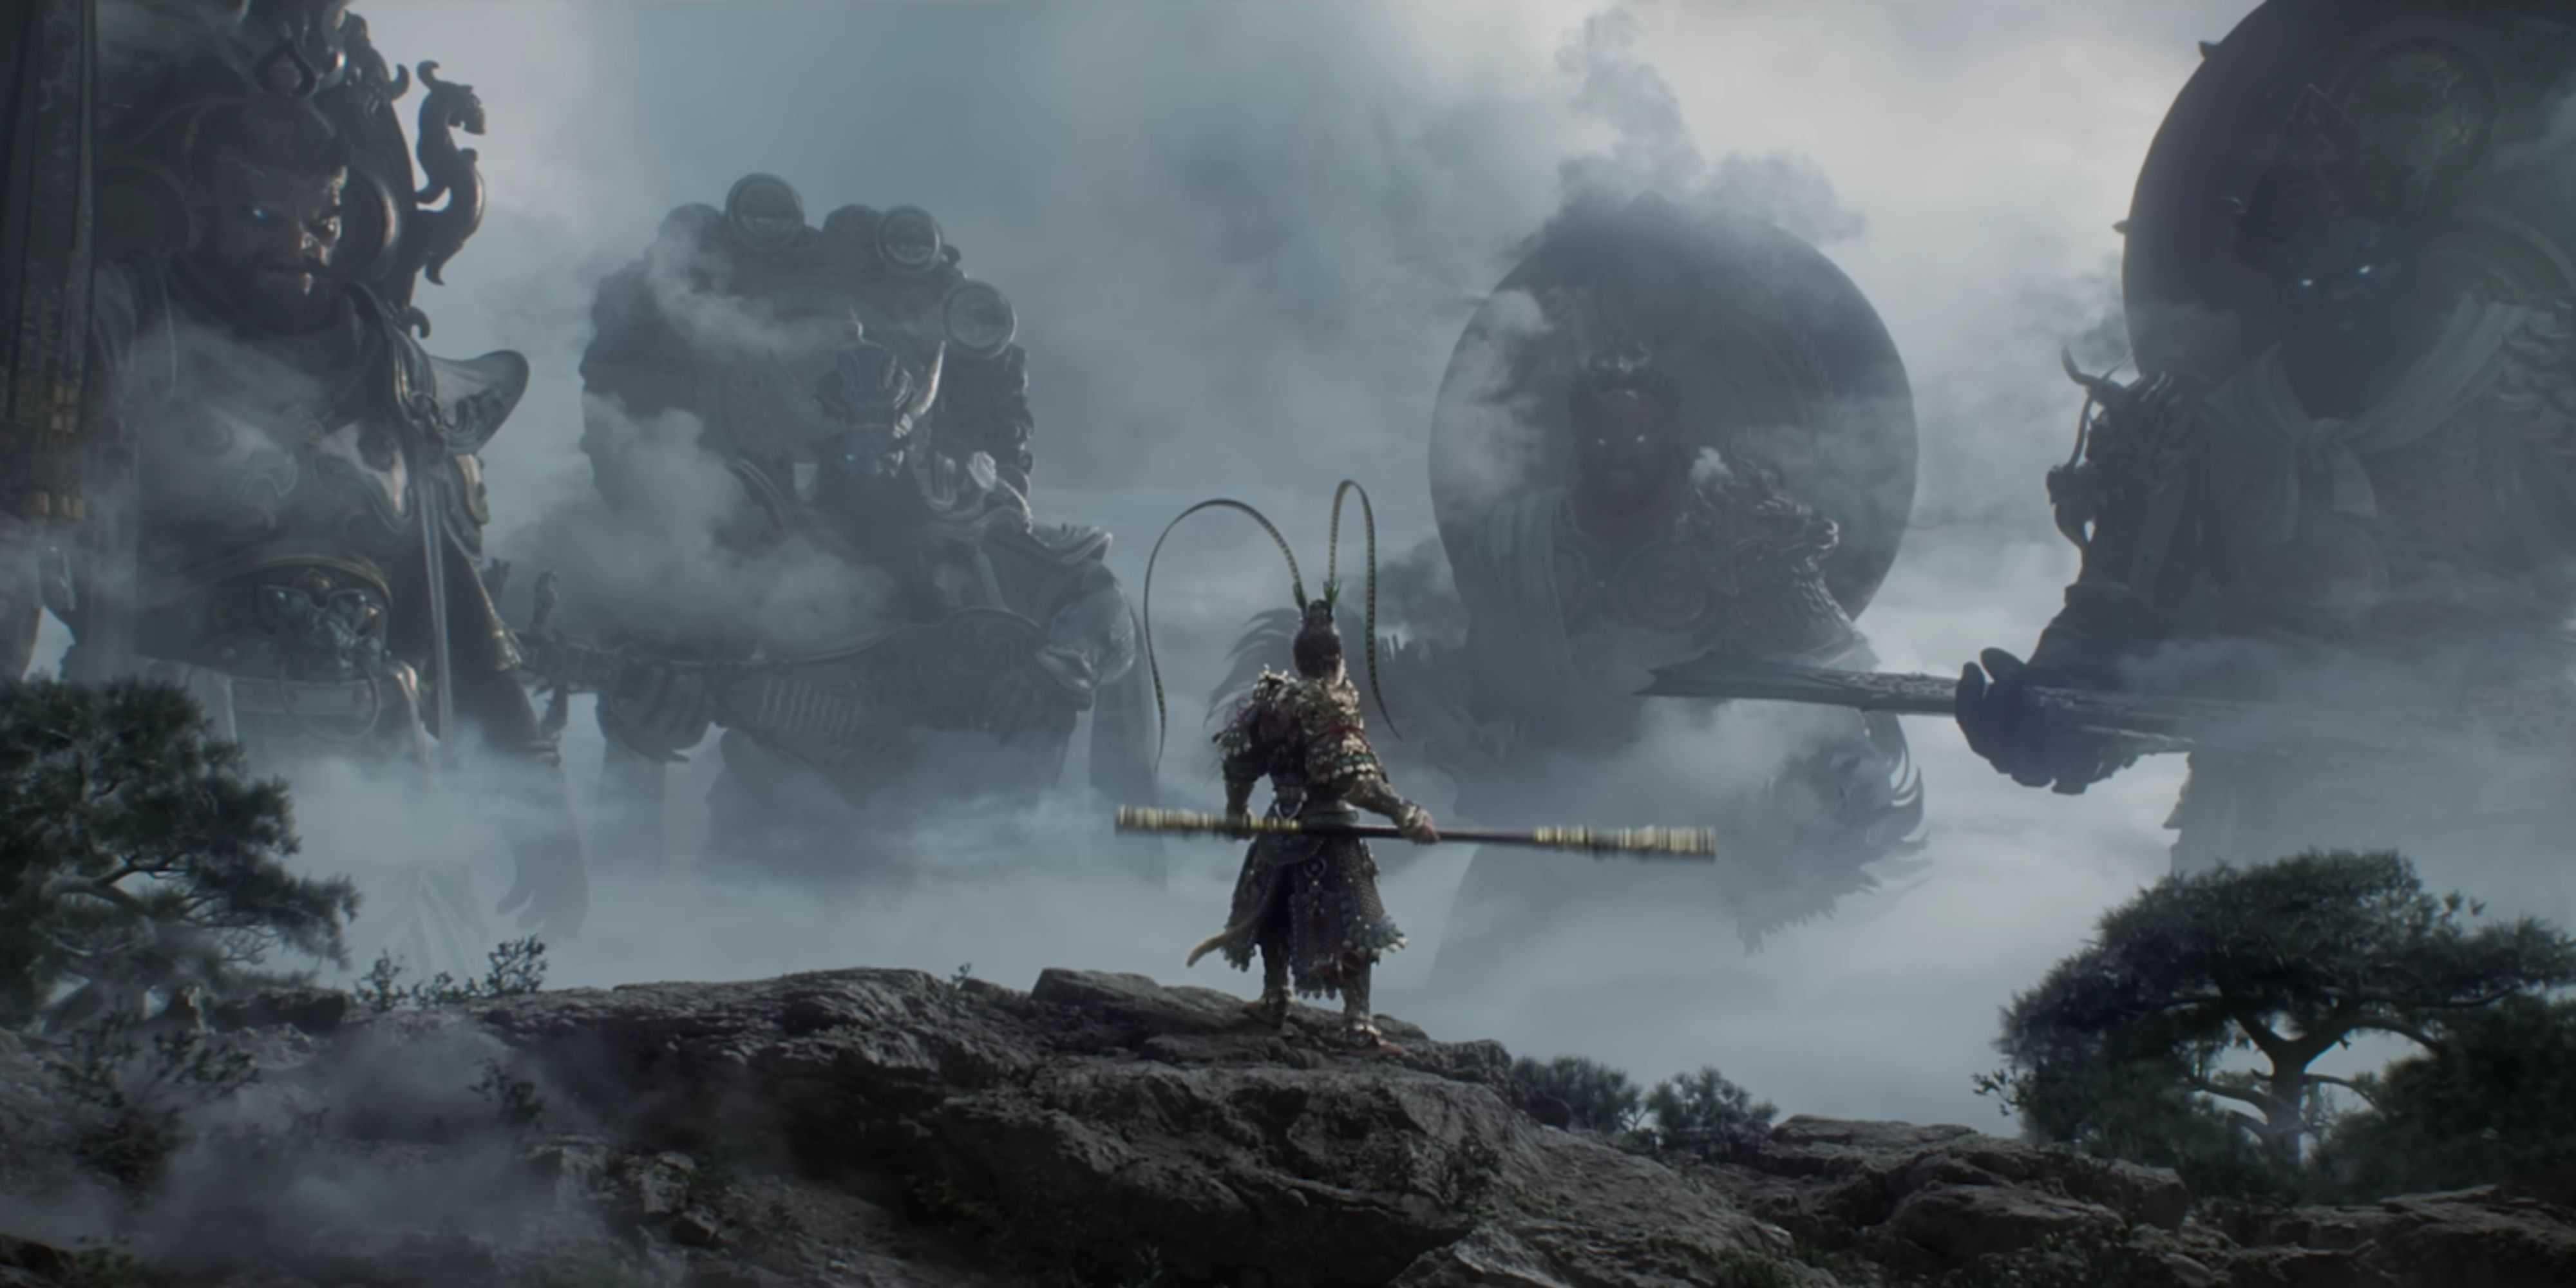 black myth wukong's protagonist facing off against four giant enemies